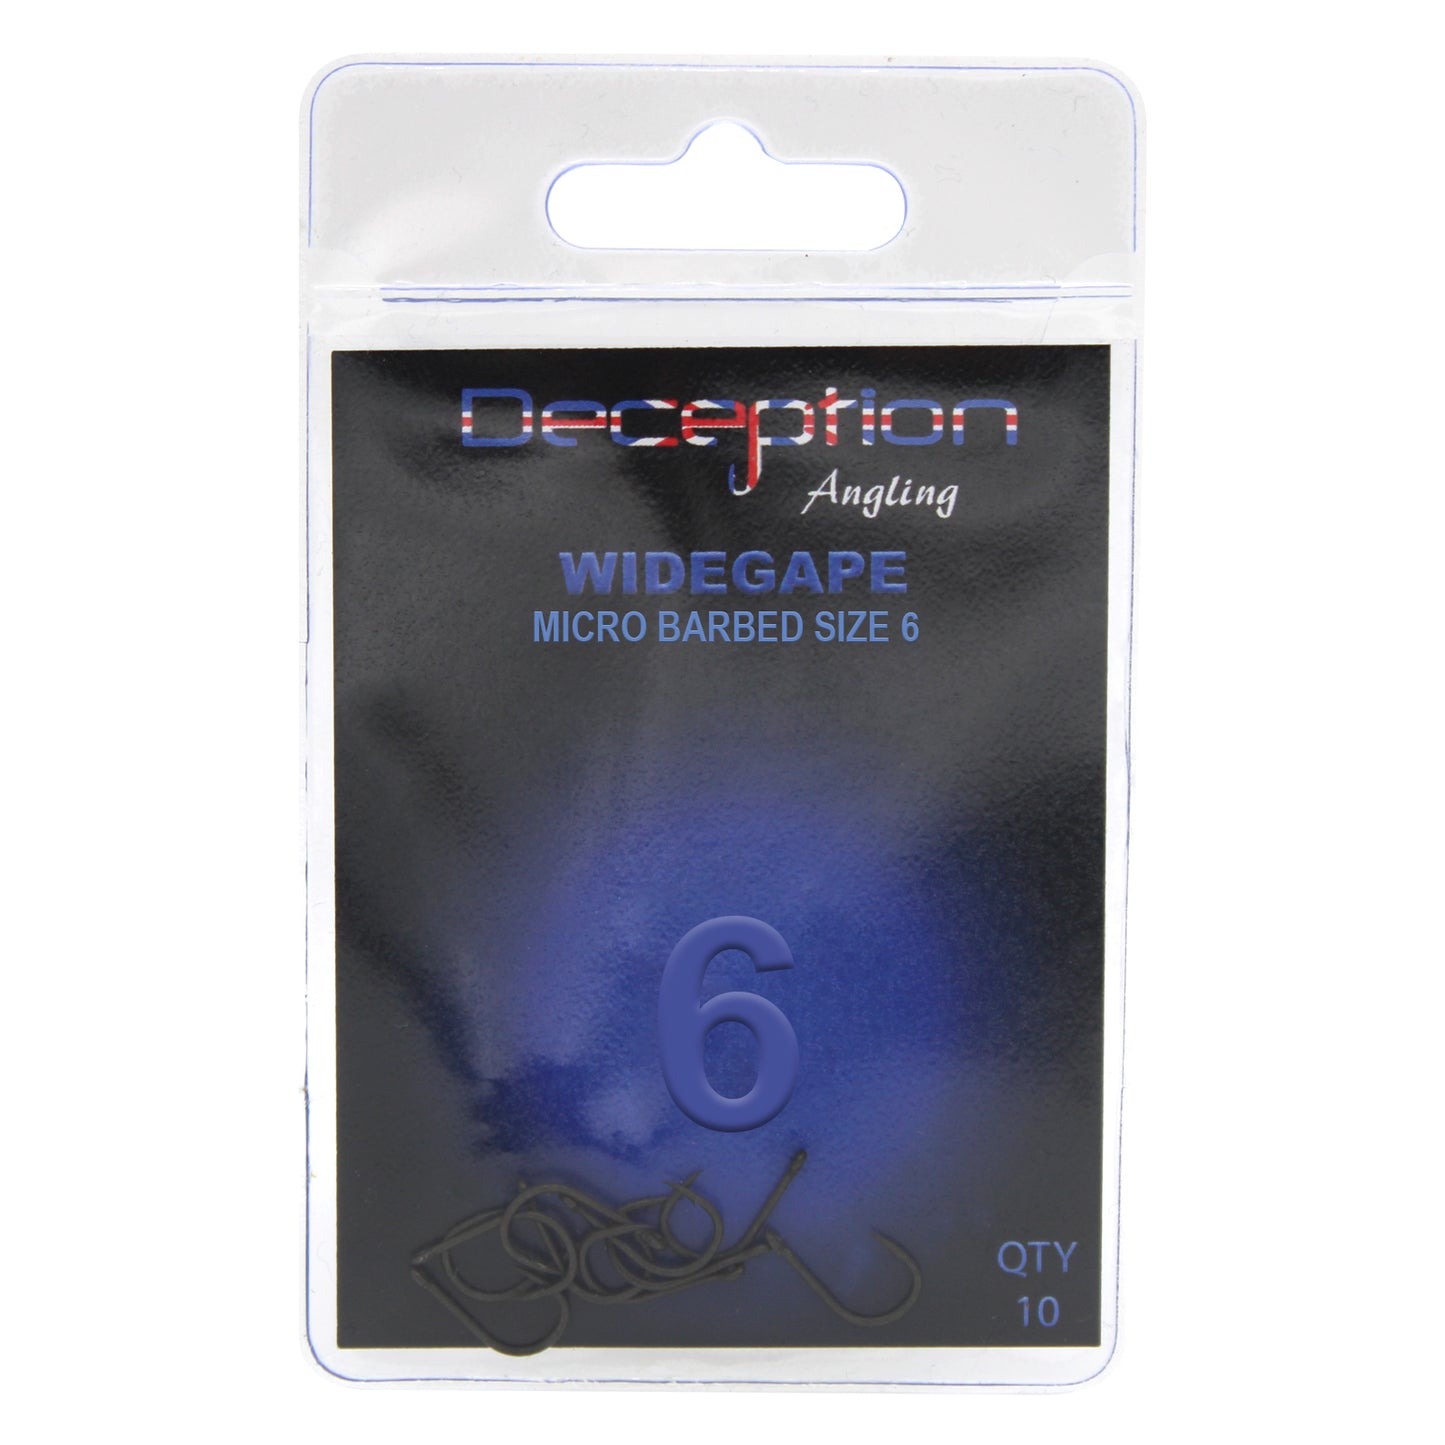 Deception Angling Wide Micro Barbed Fishing Hooks Pack of 10 Size 6